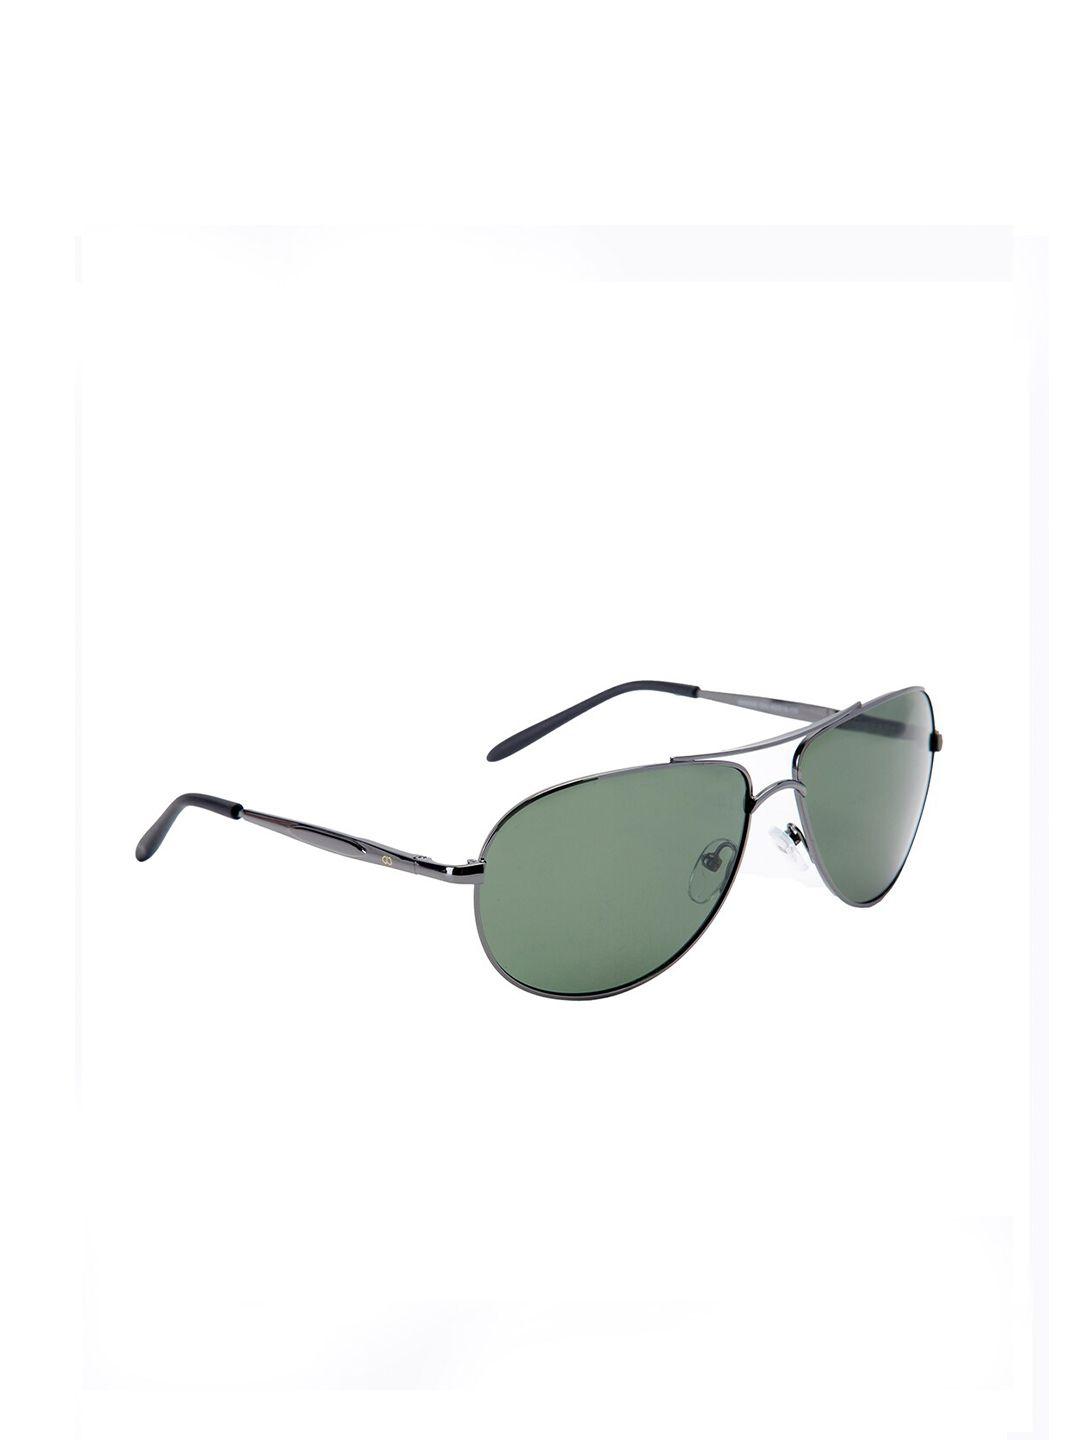 gio collection unisex green lens & gunmetal-toned wayfarer sunglasses with uv protected lens